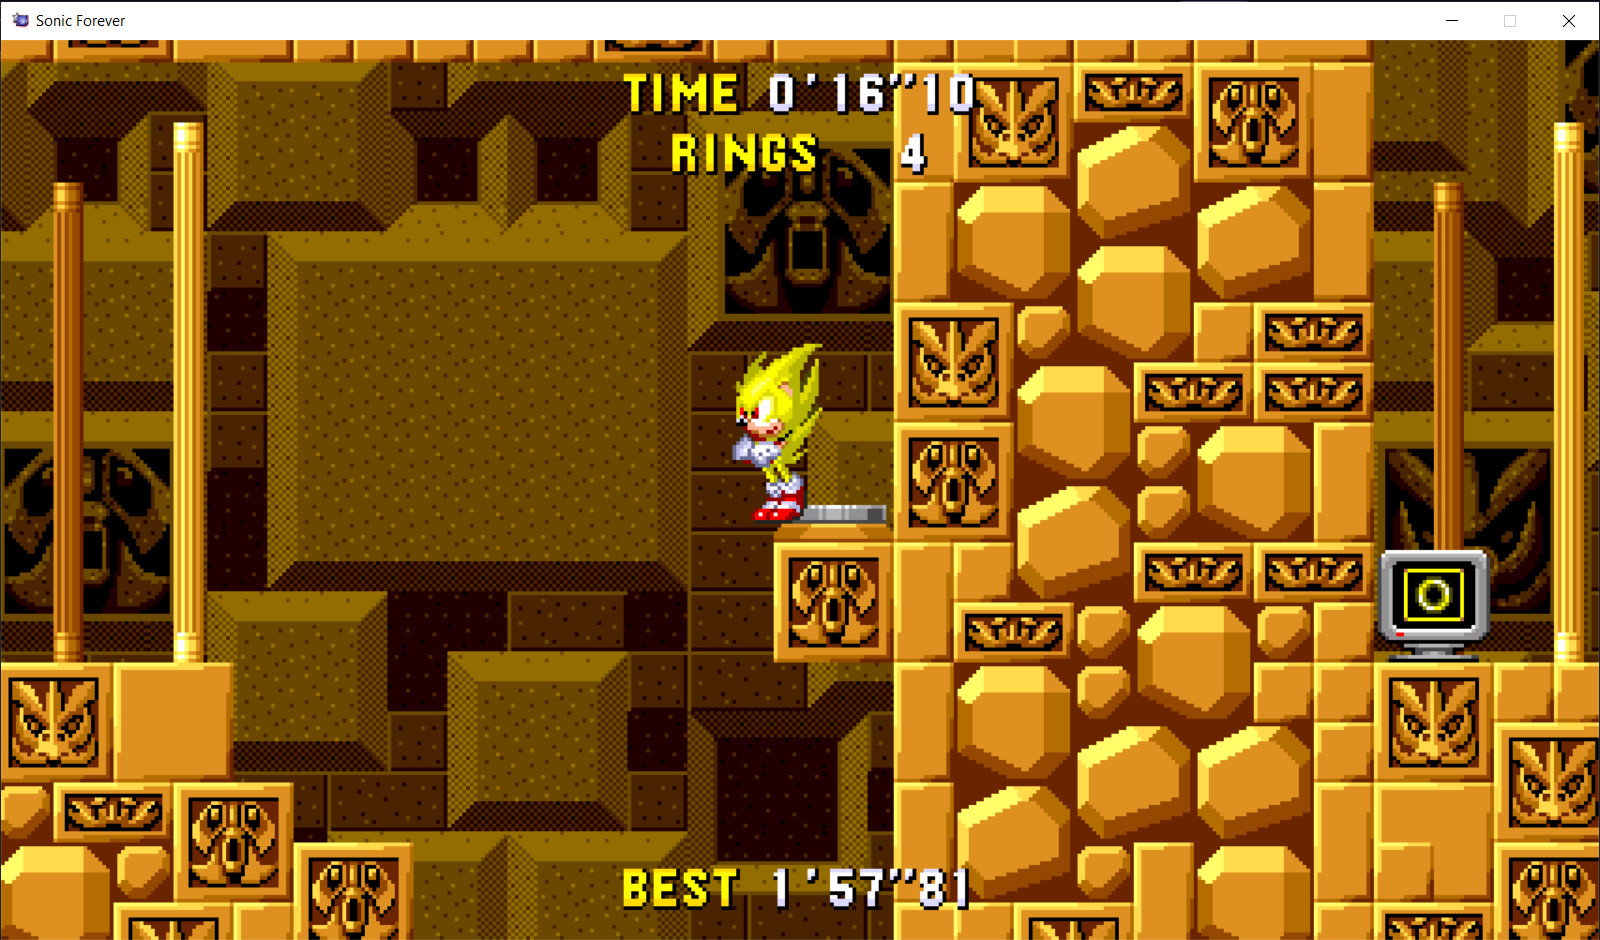 GitHub - NotSoDevy/The-Sonic-Debut-Experience: A Sonic 1 Forever mod where  you experience Sonic Debut in RSDK form.